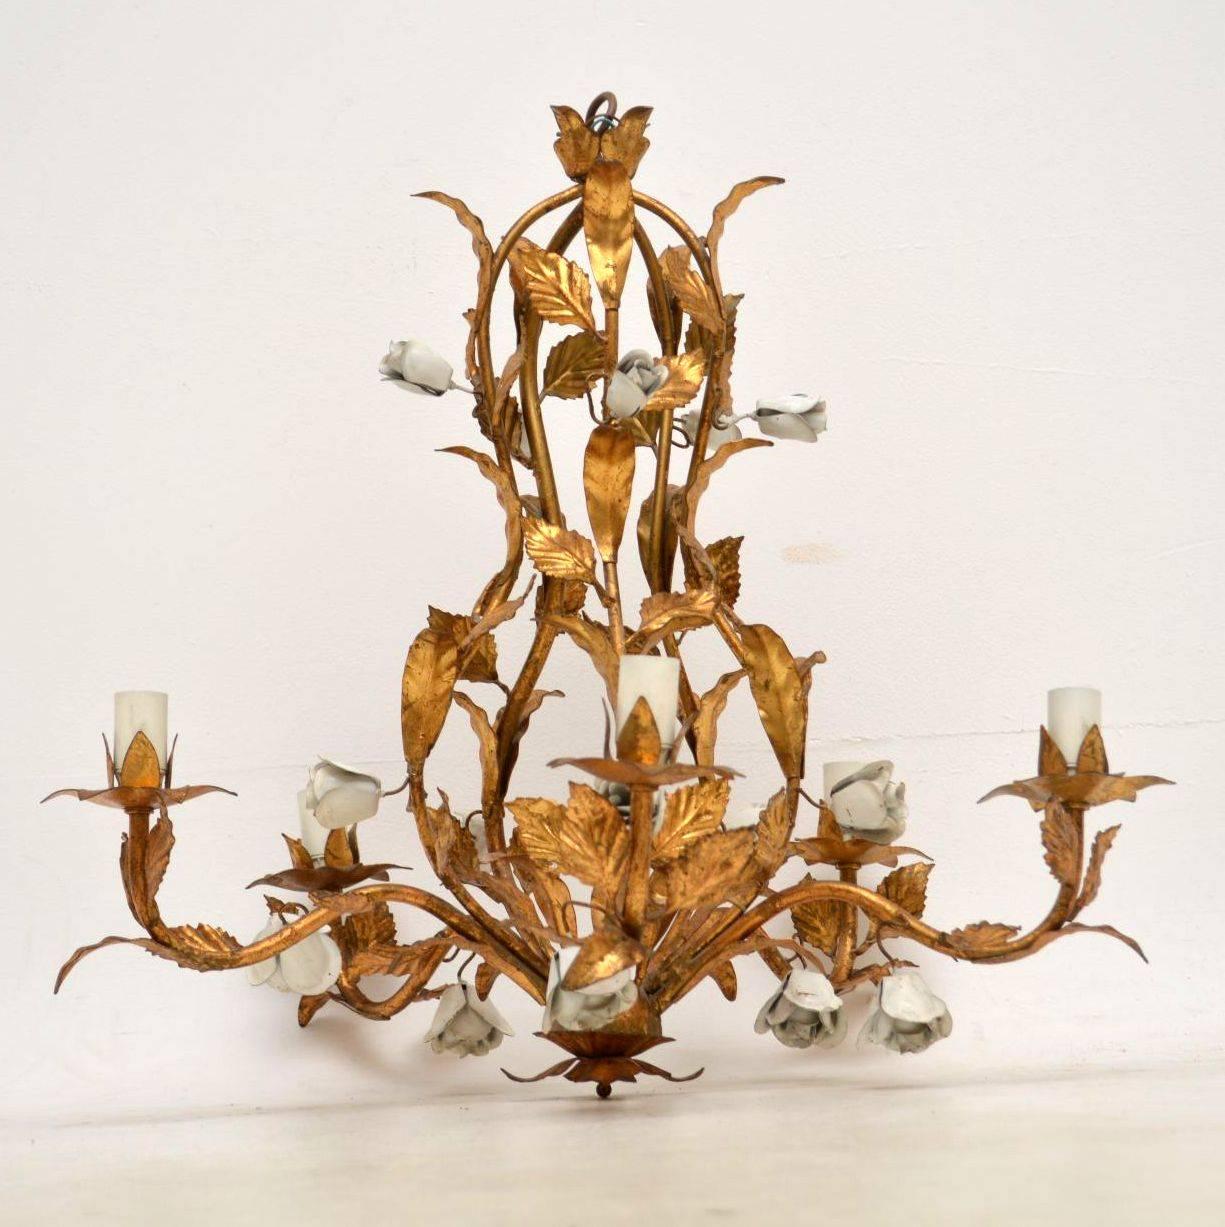 An absolutely stunning vintage chandelier in gilt metal, this was made in Italy and it dates from around the 1950s-1960s. It’s of amazing quality with a beautiful floral design. The rose buds are painted white, and the condition is excellent for its